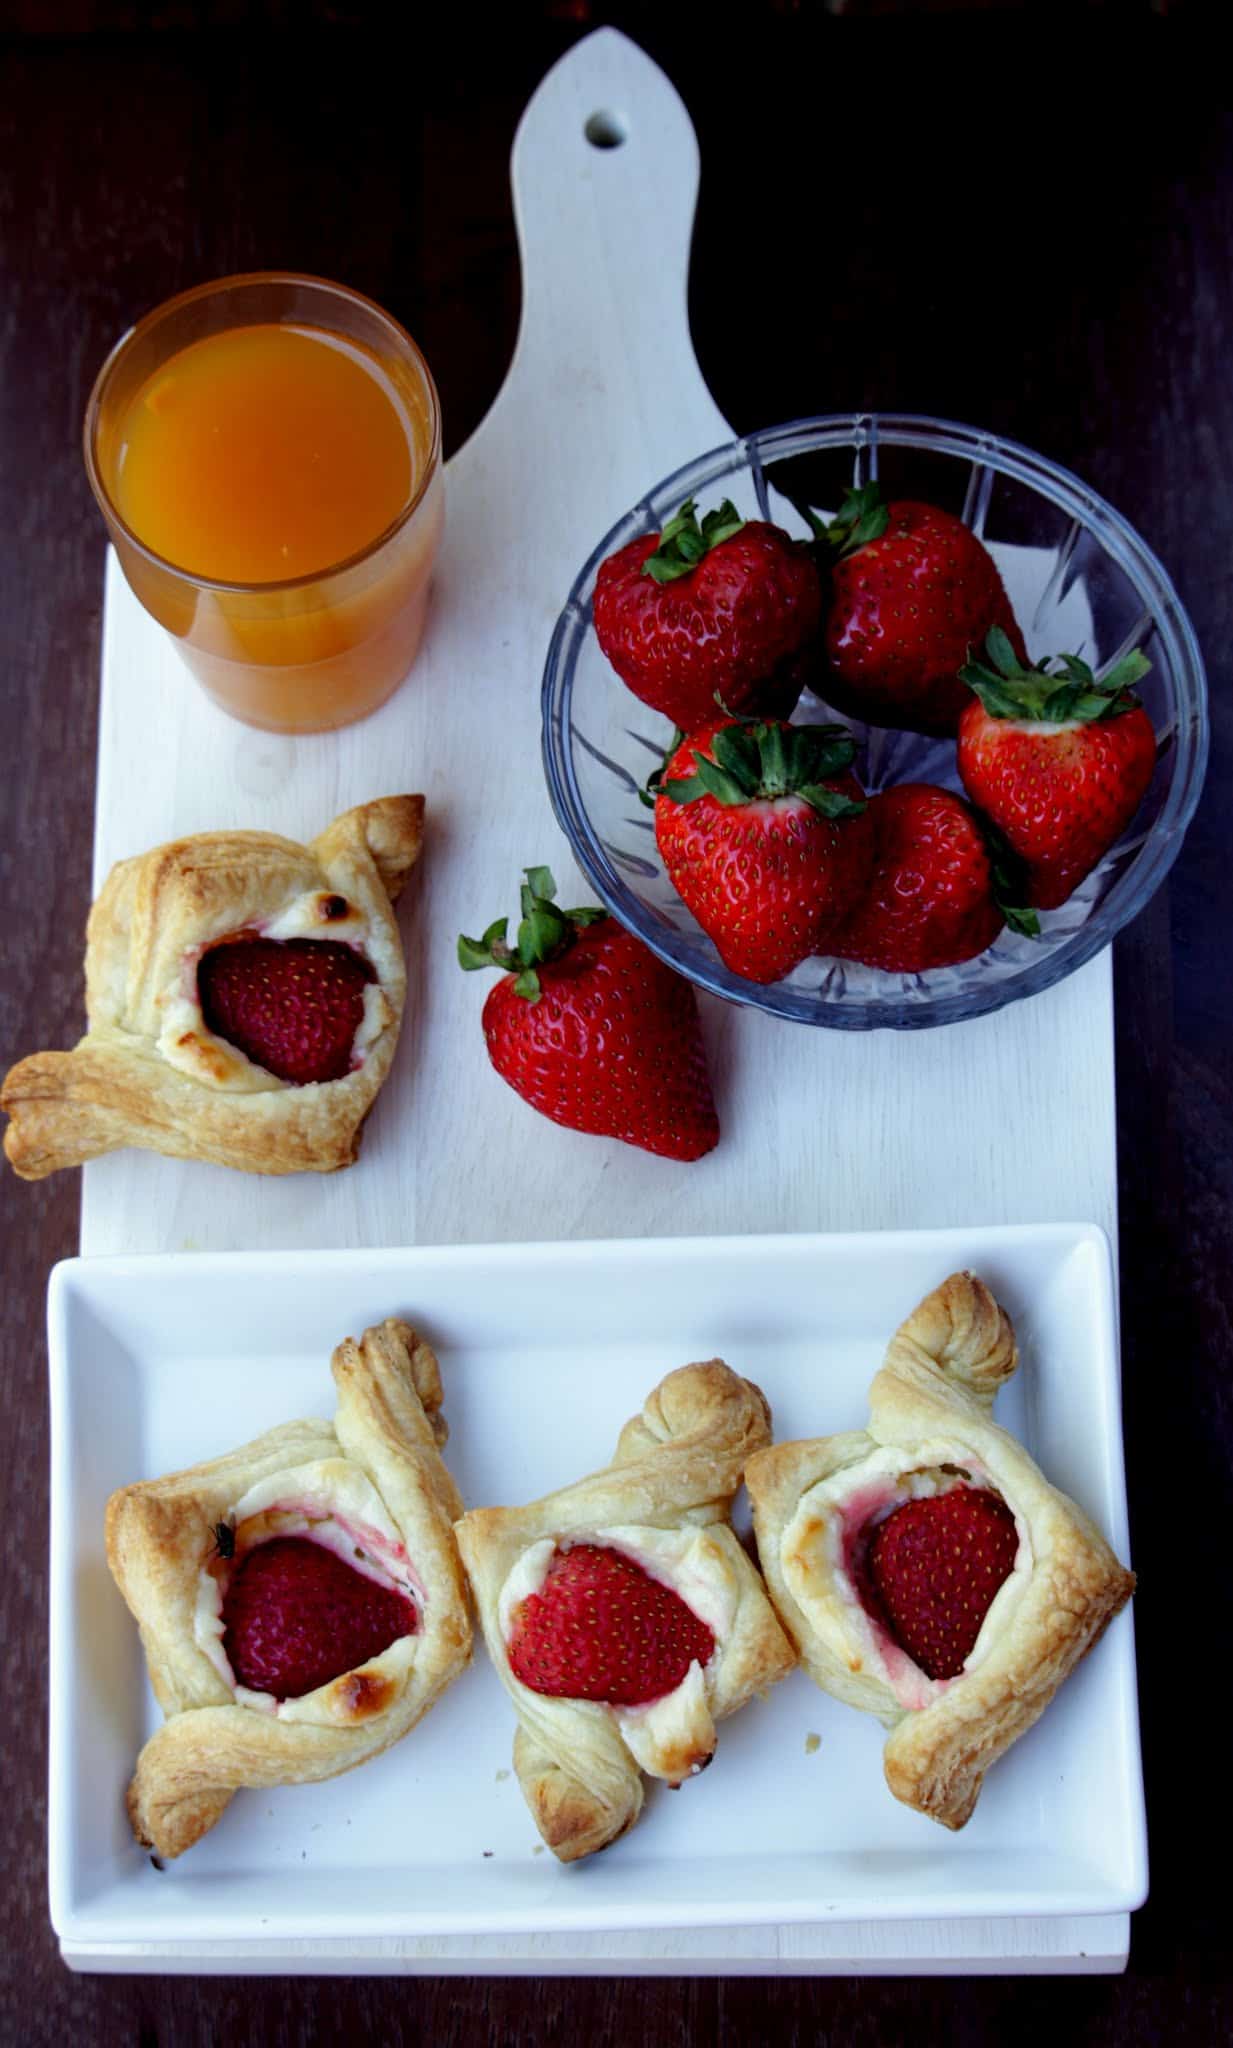 Strawberry Cream Cheese Pastry served in a dish